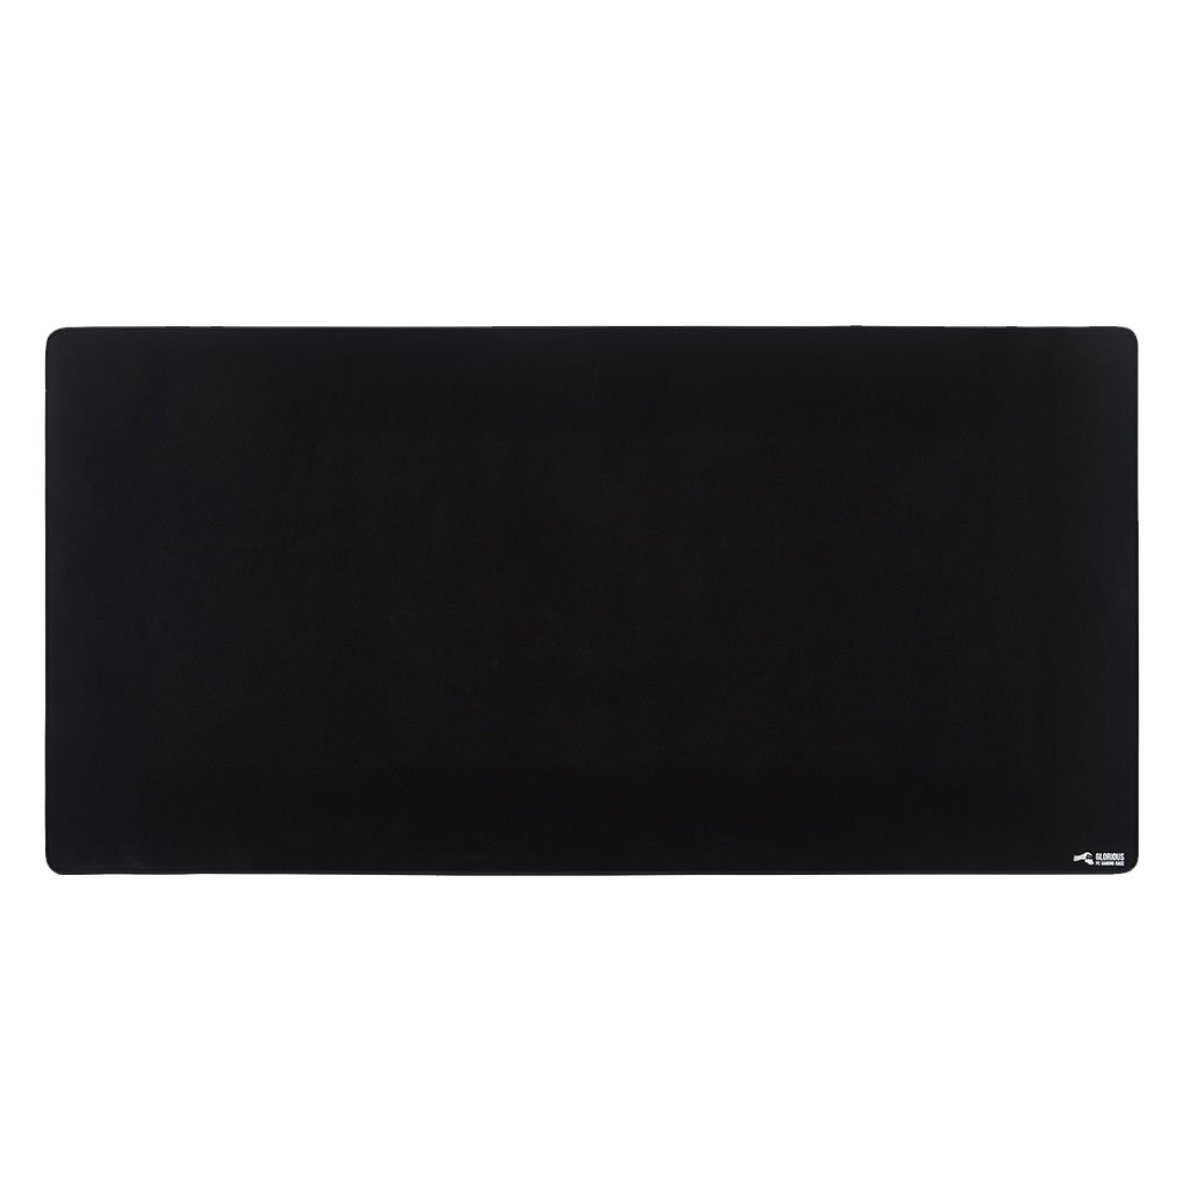 Glorious 3XL Extended Gaming Mouse Pad 24x48 Black - Store 974 | ستور ٩٧٤